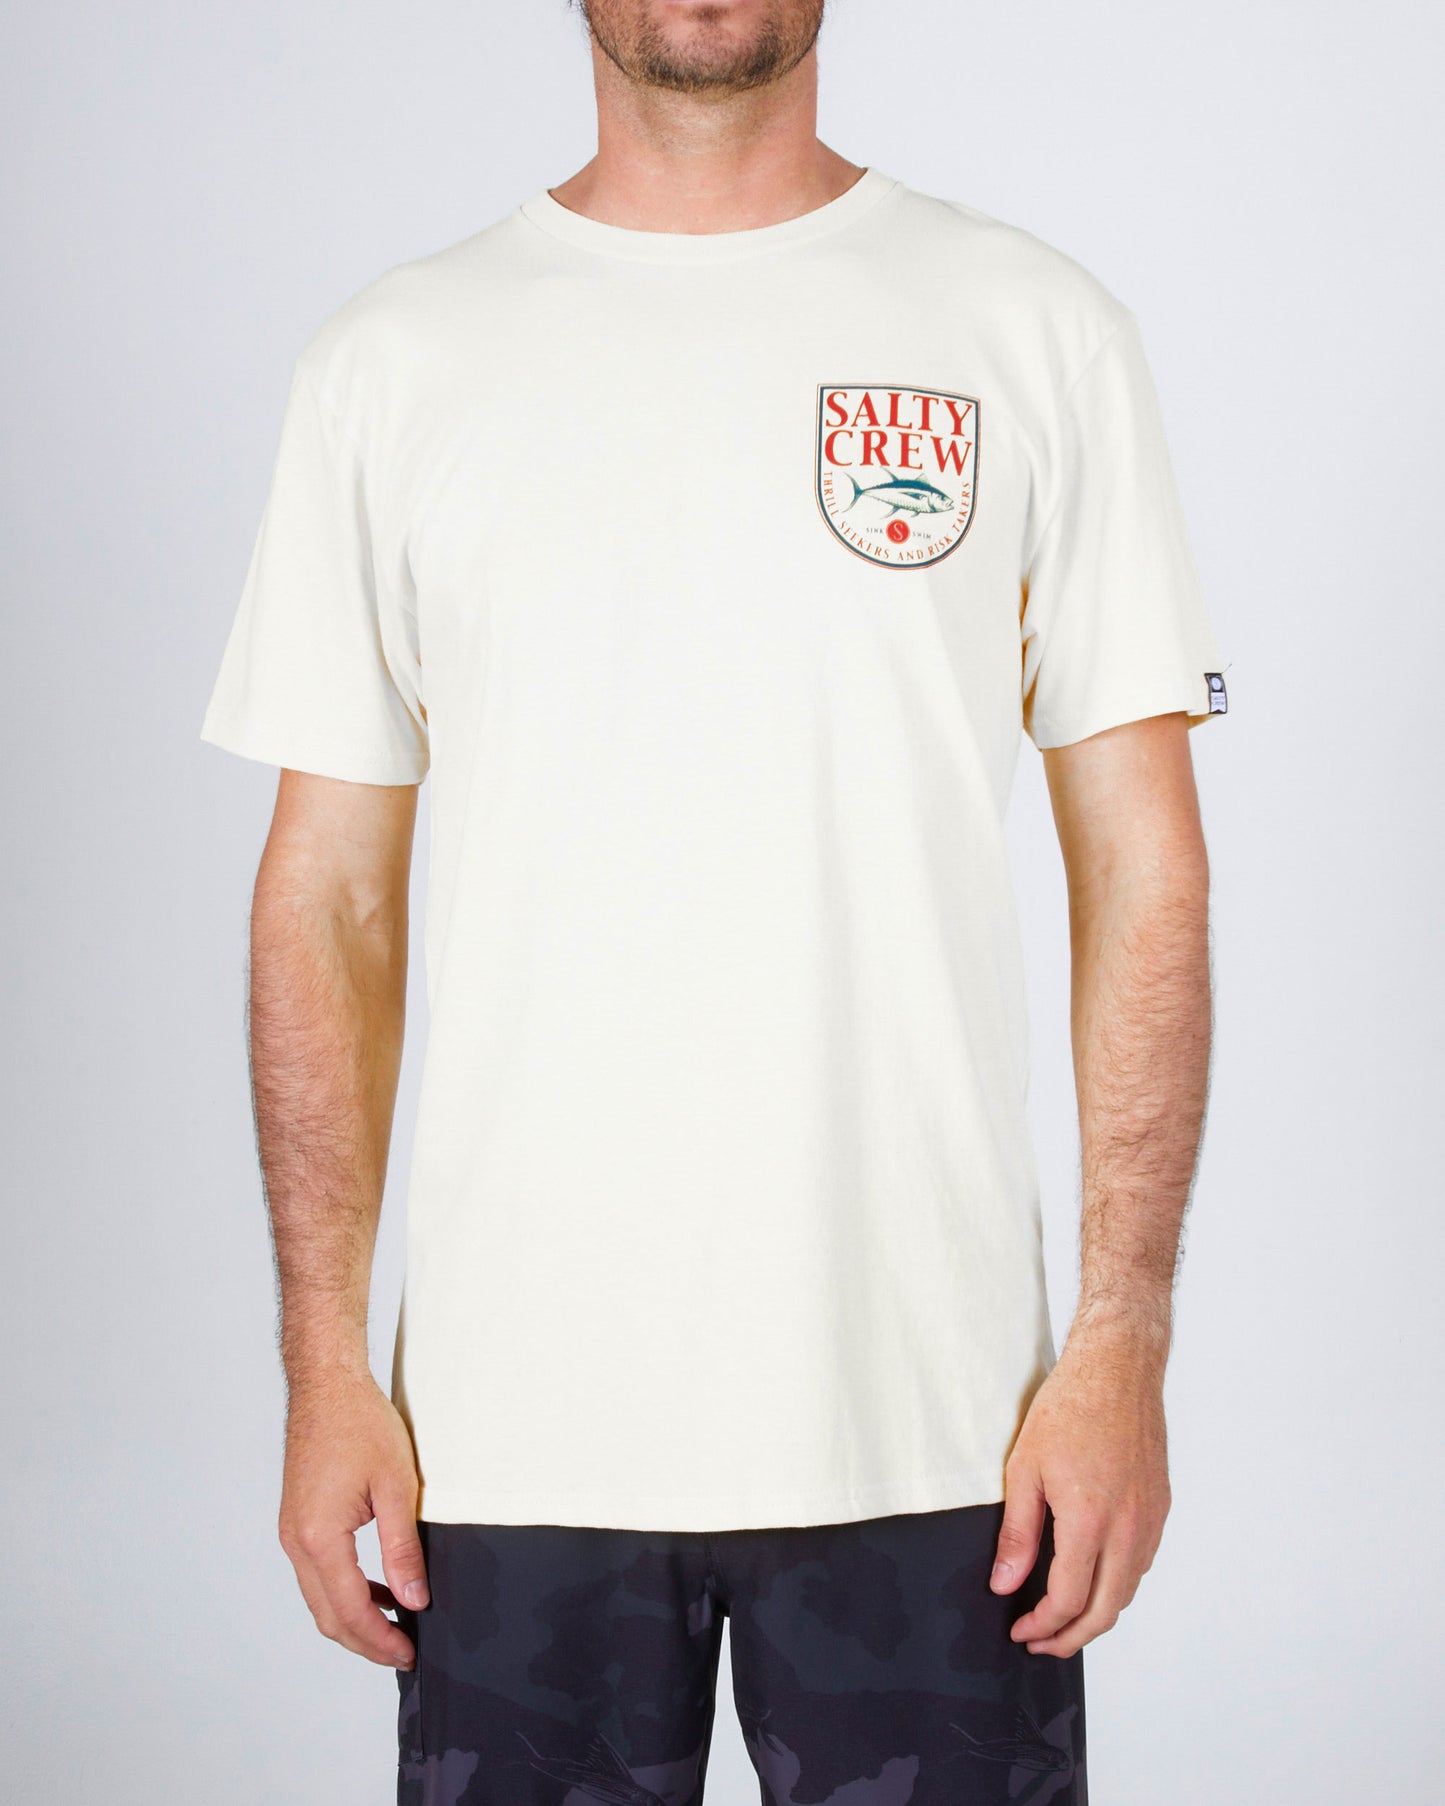 CURRENT STANDARD S/S TEE - WHITE